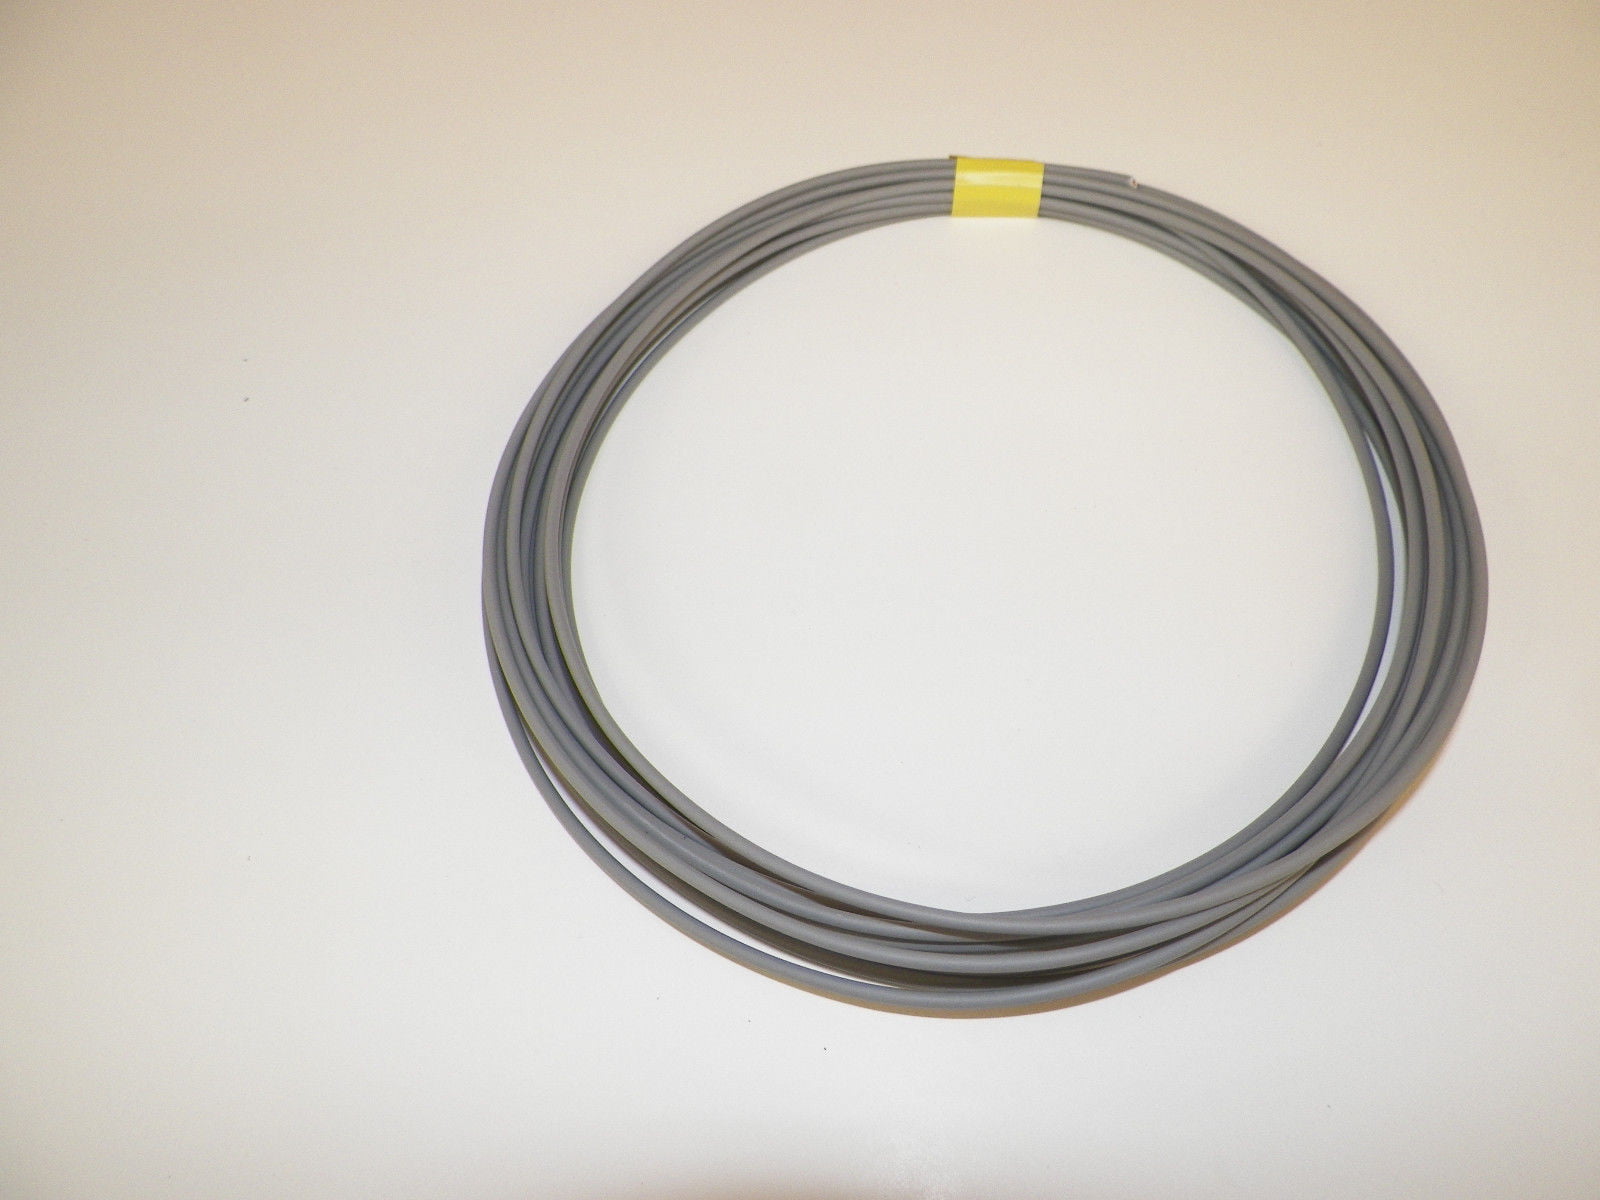 GRAY Abrasion-Resistant General Purpose Wire GXL 25 feet coil 16 Ga. 